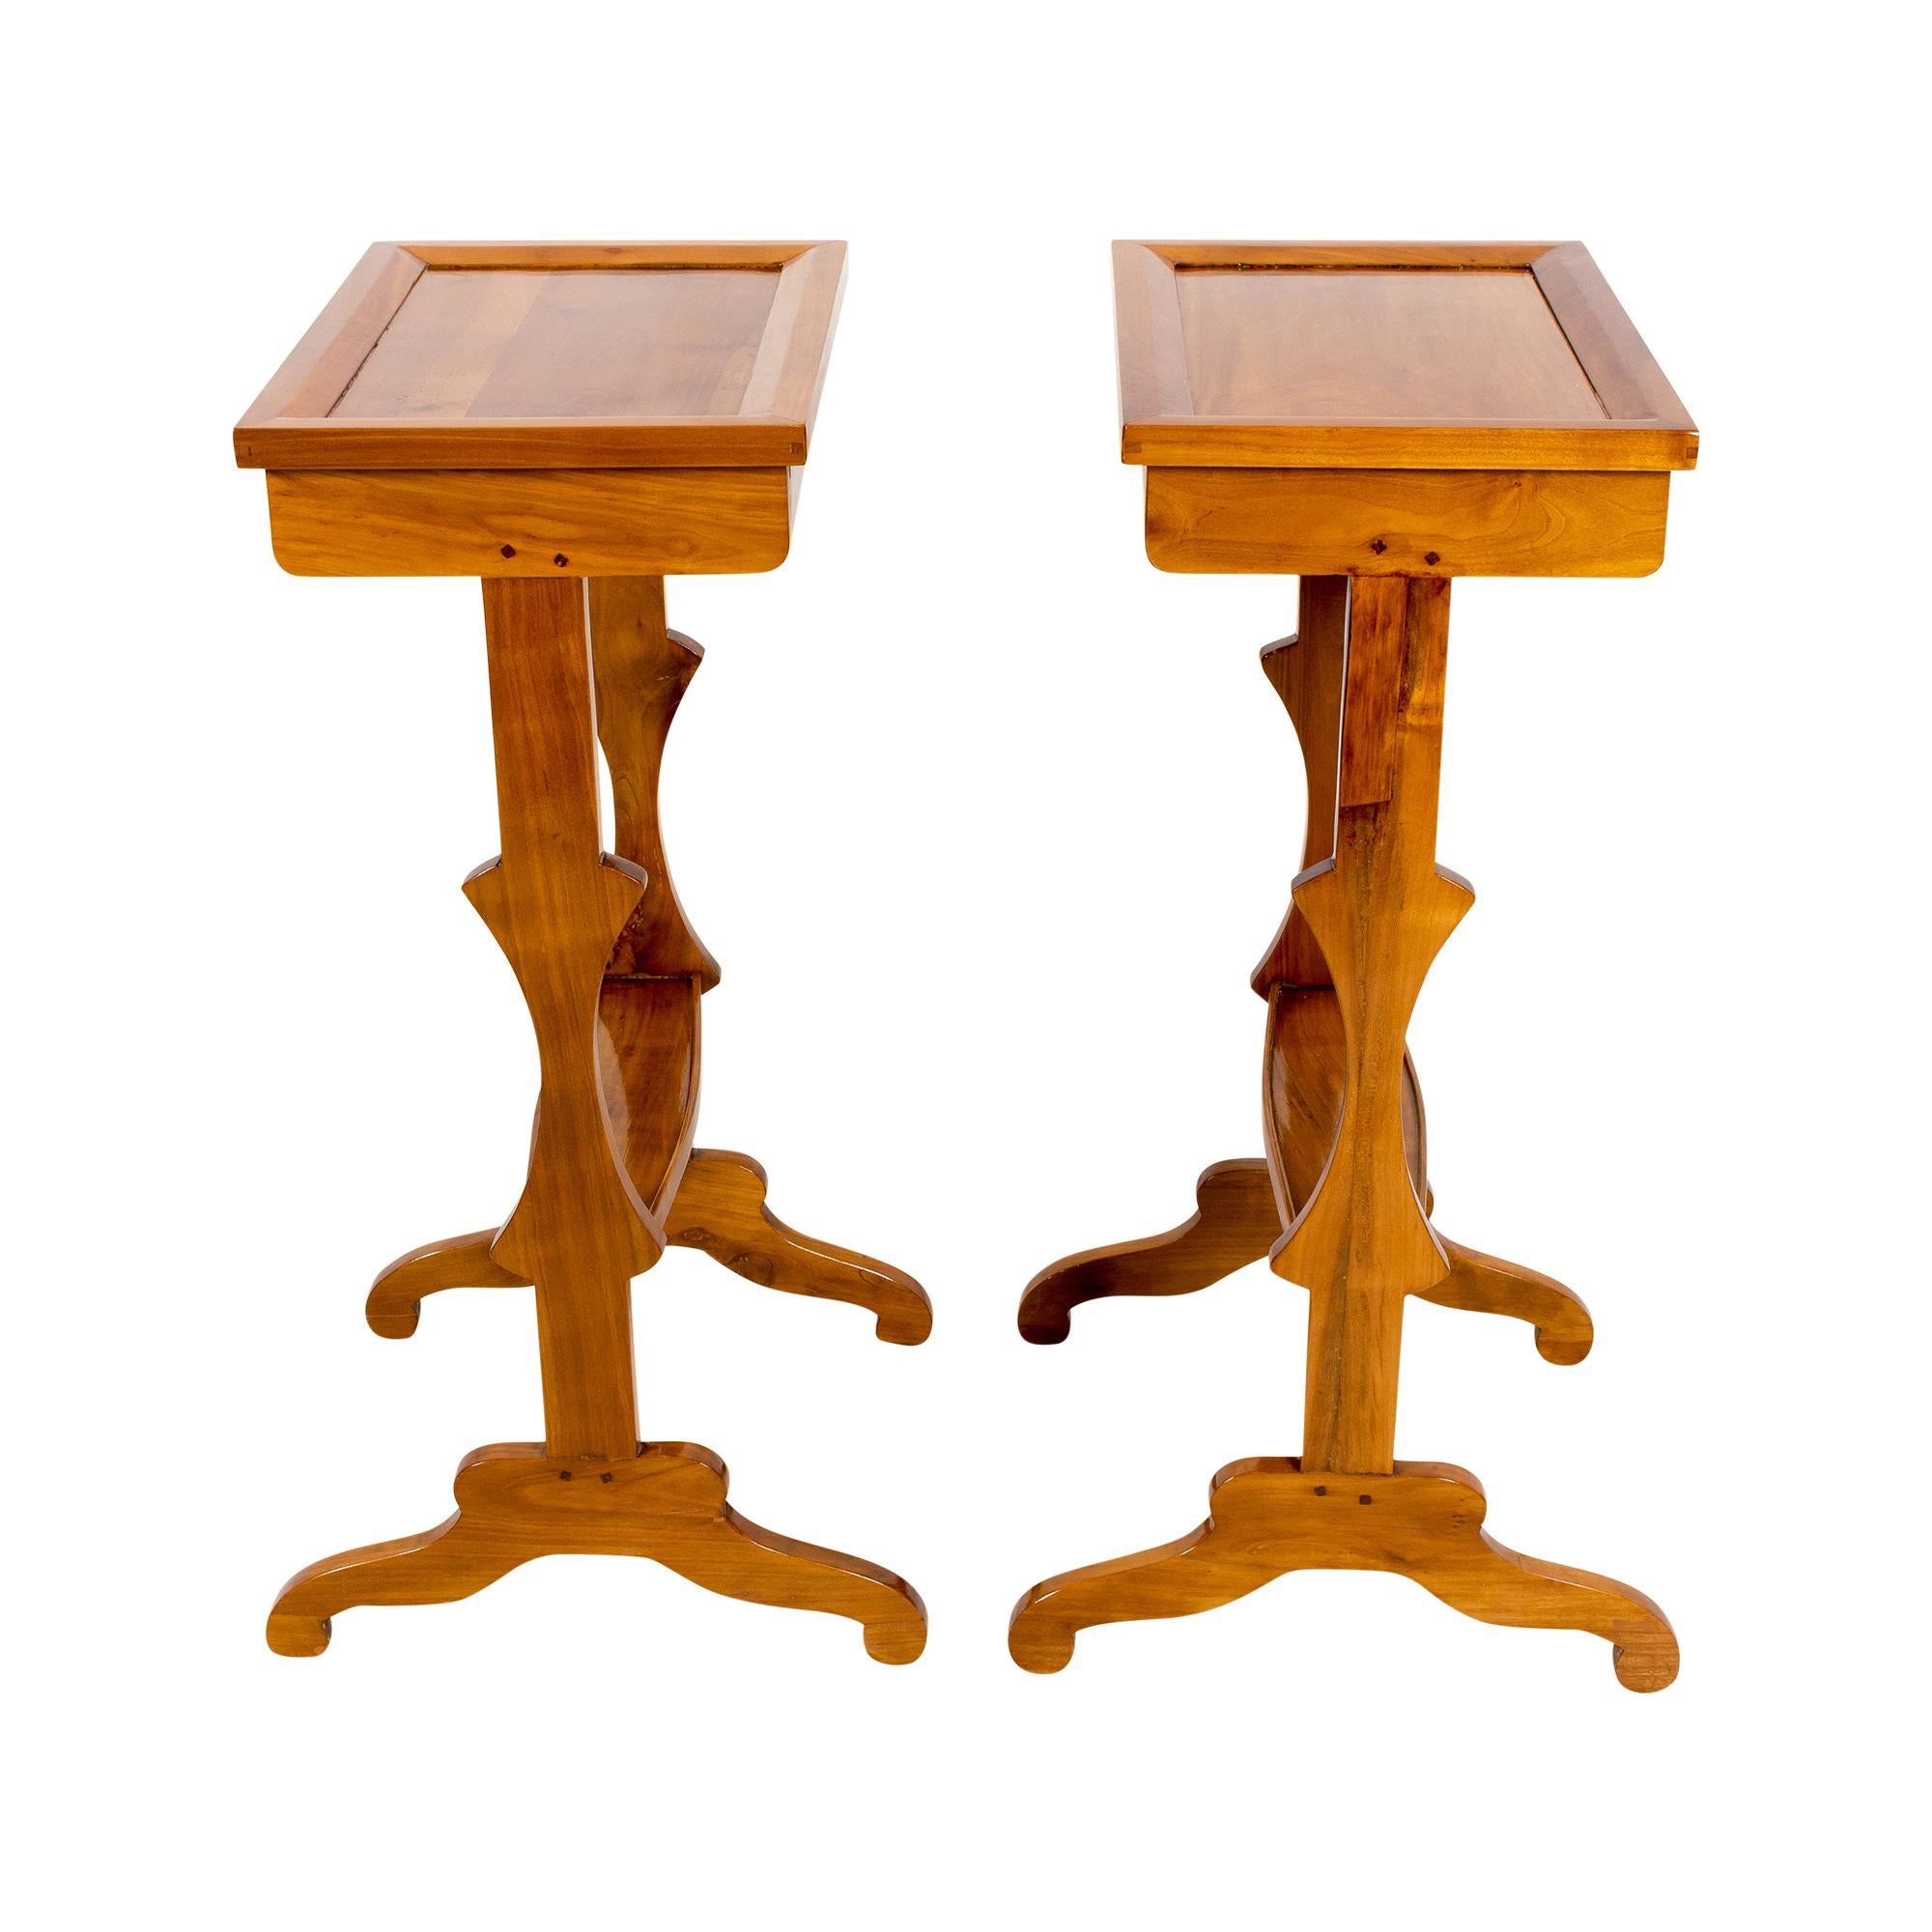 Very nice filigree pair of side tables made of solid cherrywood from France from the time around 1850. Both tables have a drawer with a brass button to open. The tables are in very good restored condition.